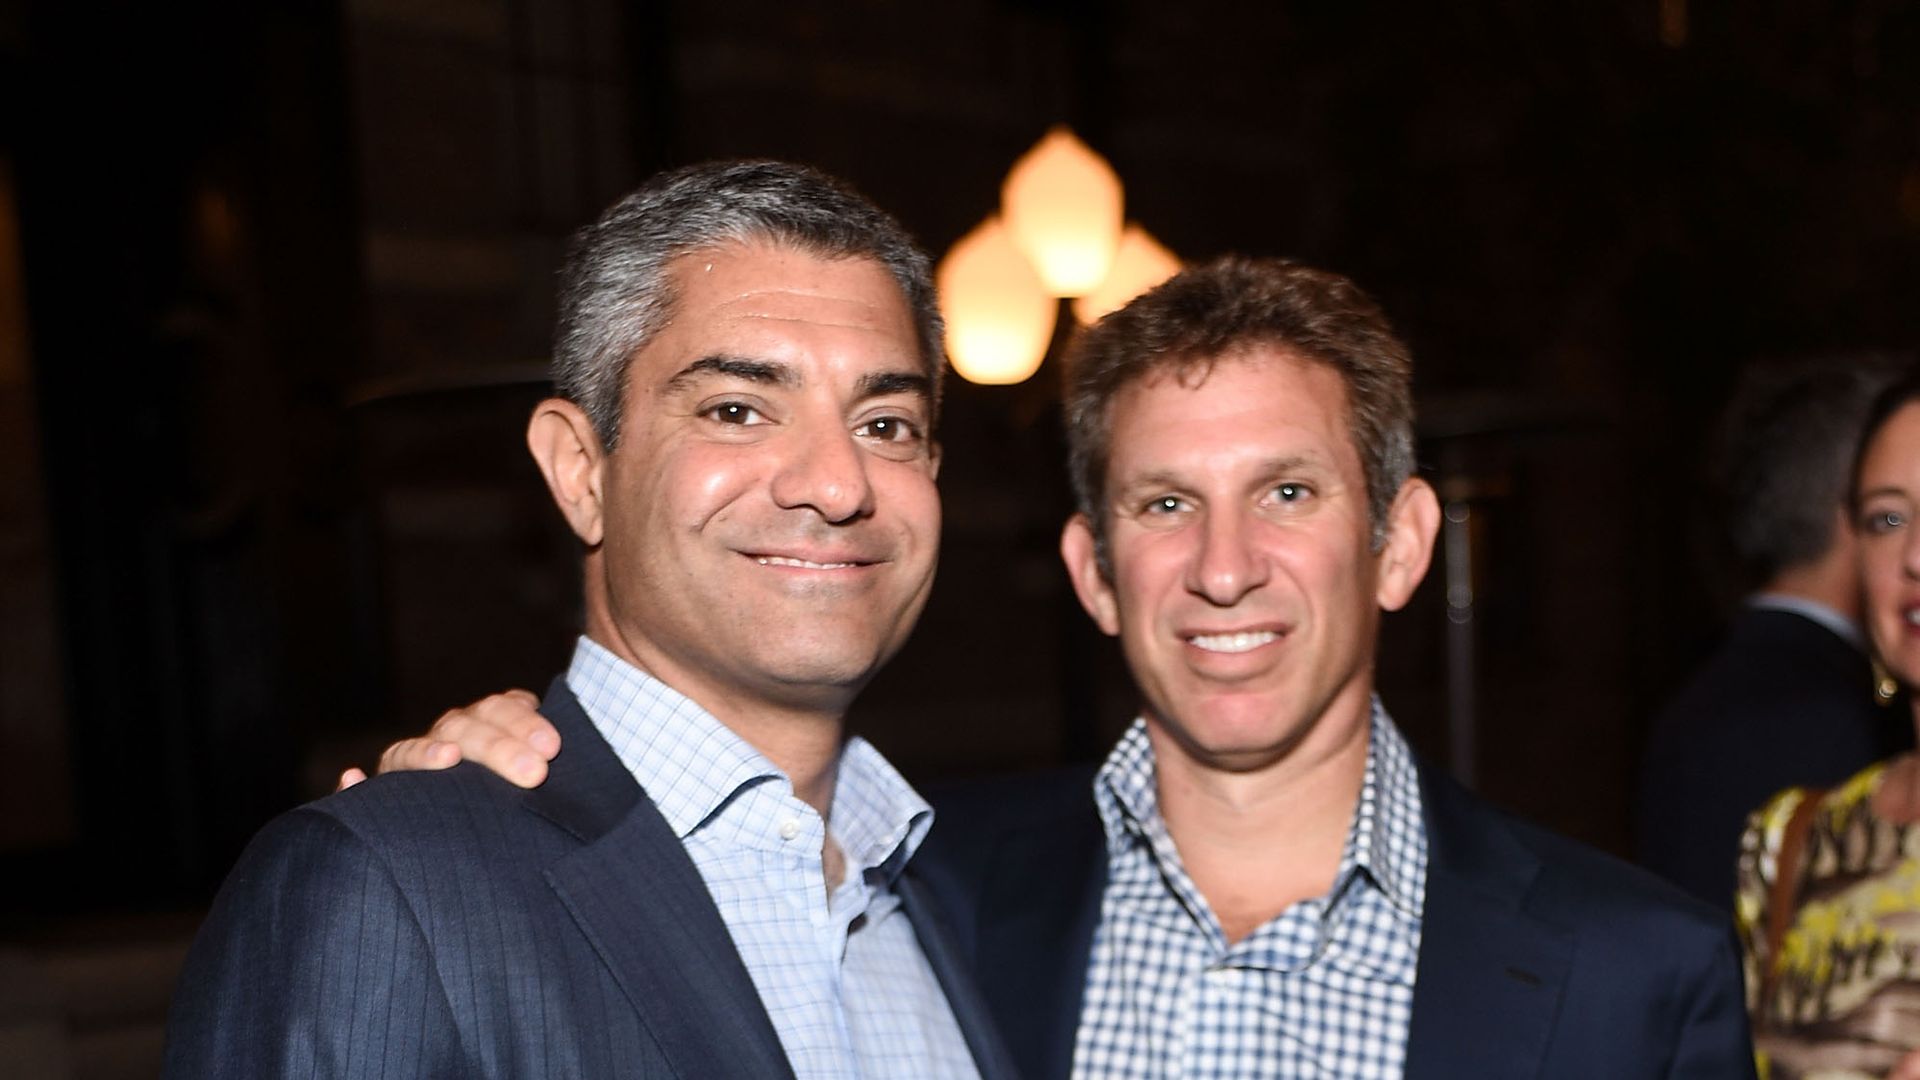 Two Moelis bankers, Navid Mahmoodzadegan and Craig Wadler, stand side by side for a photo in Los Angeles in 2015